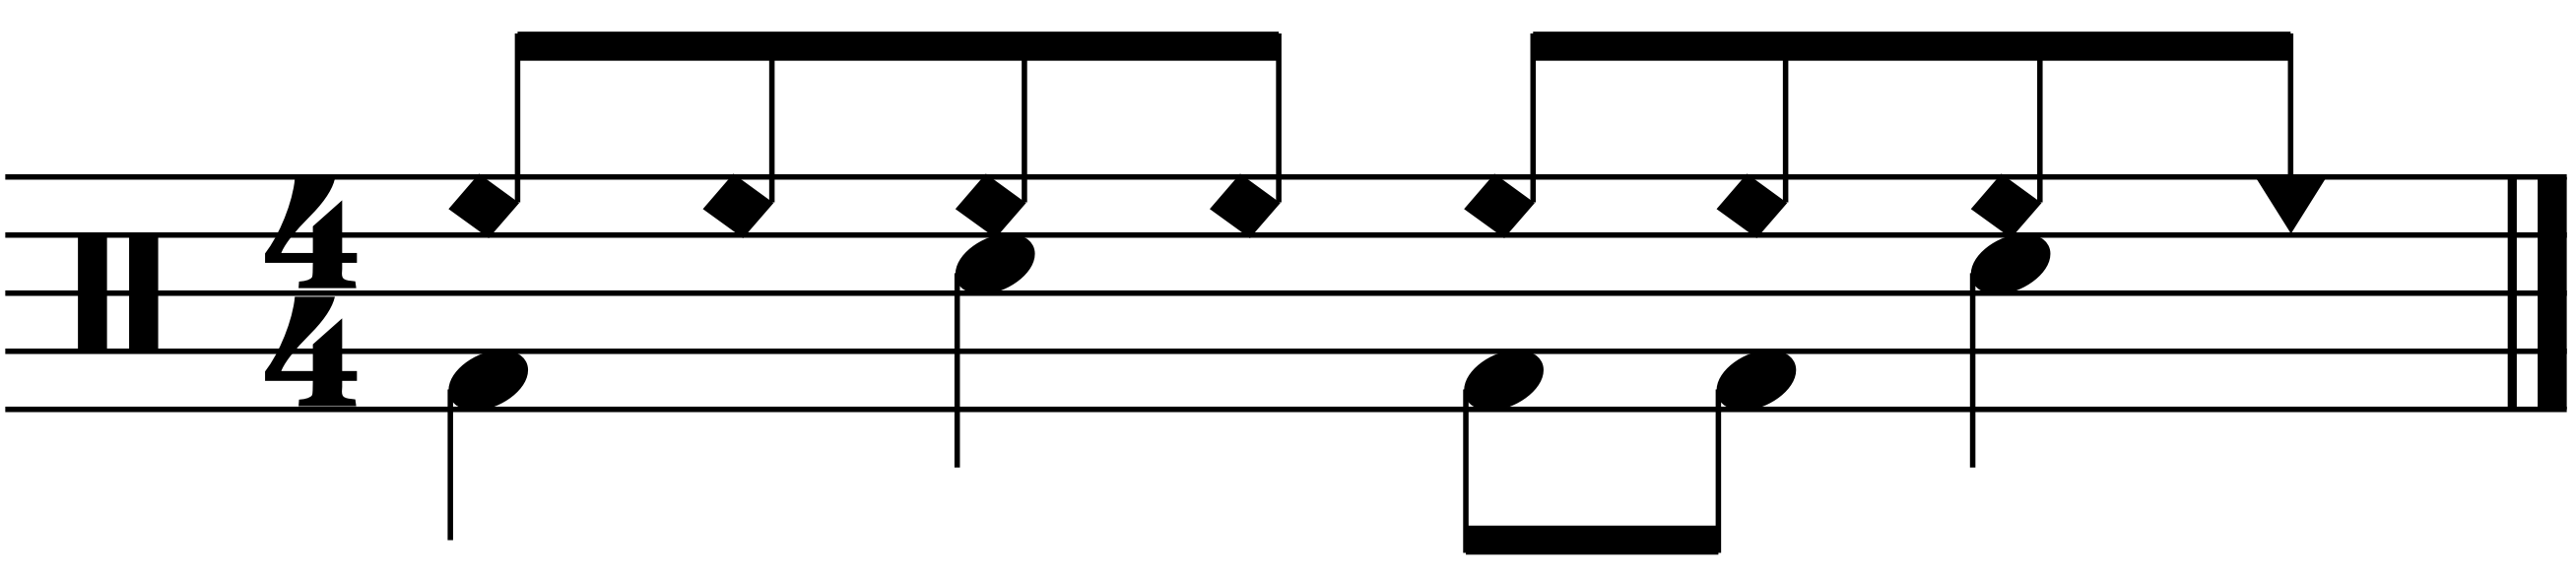 A groove with the right hand played on a shell rim